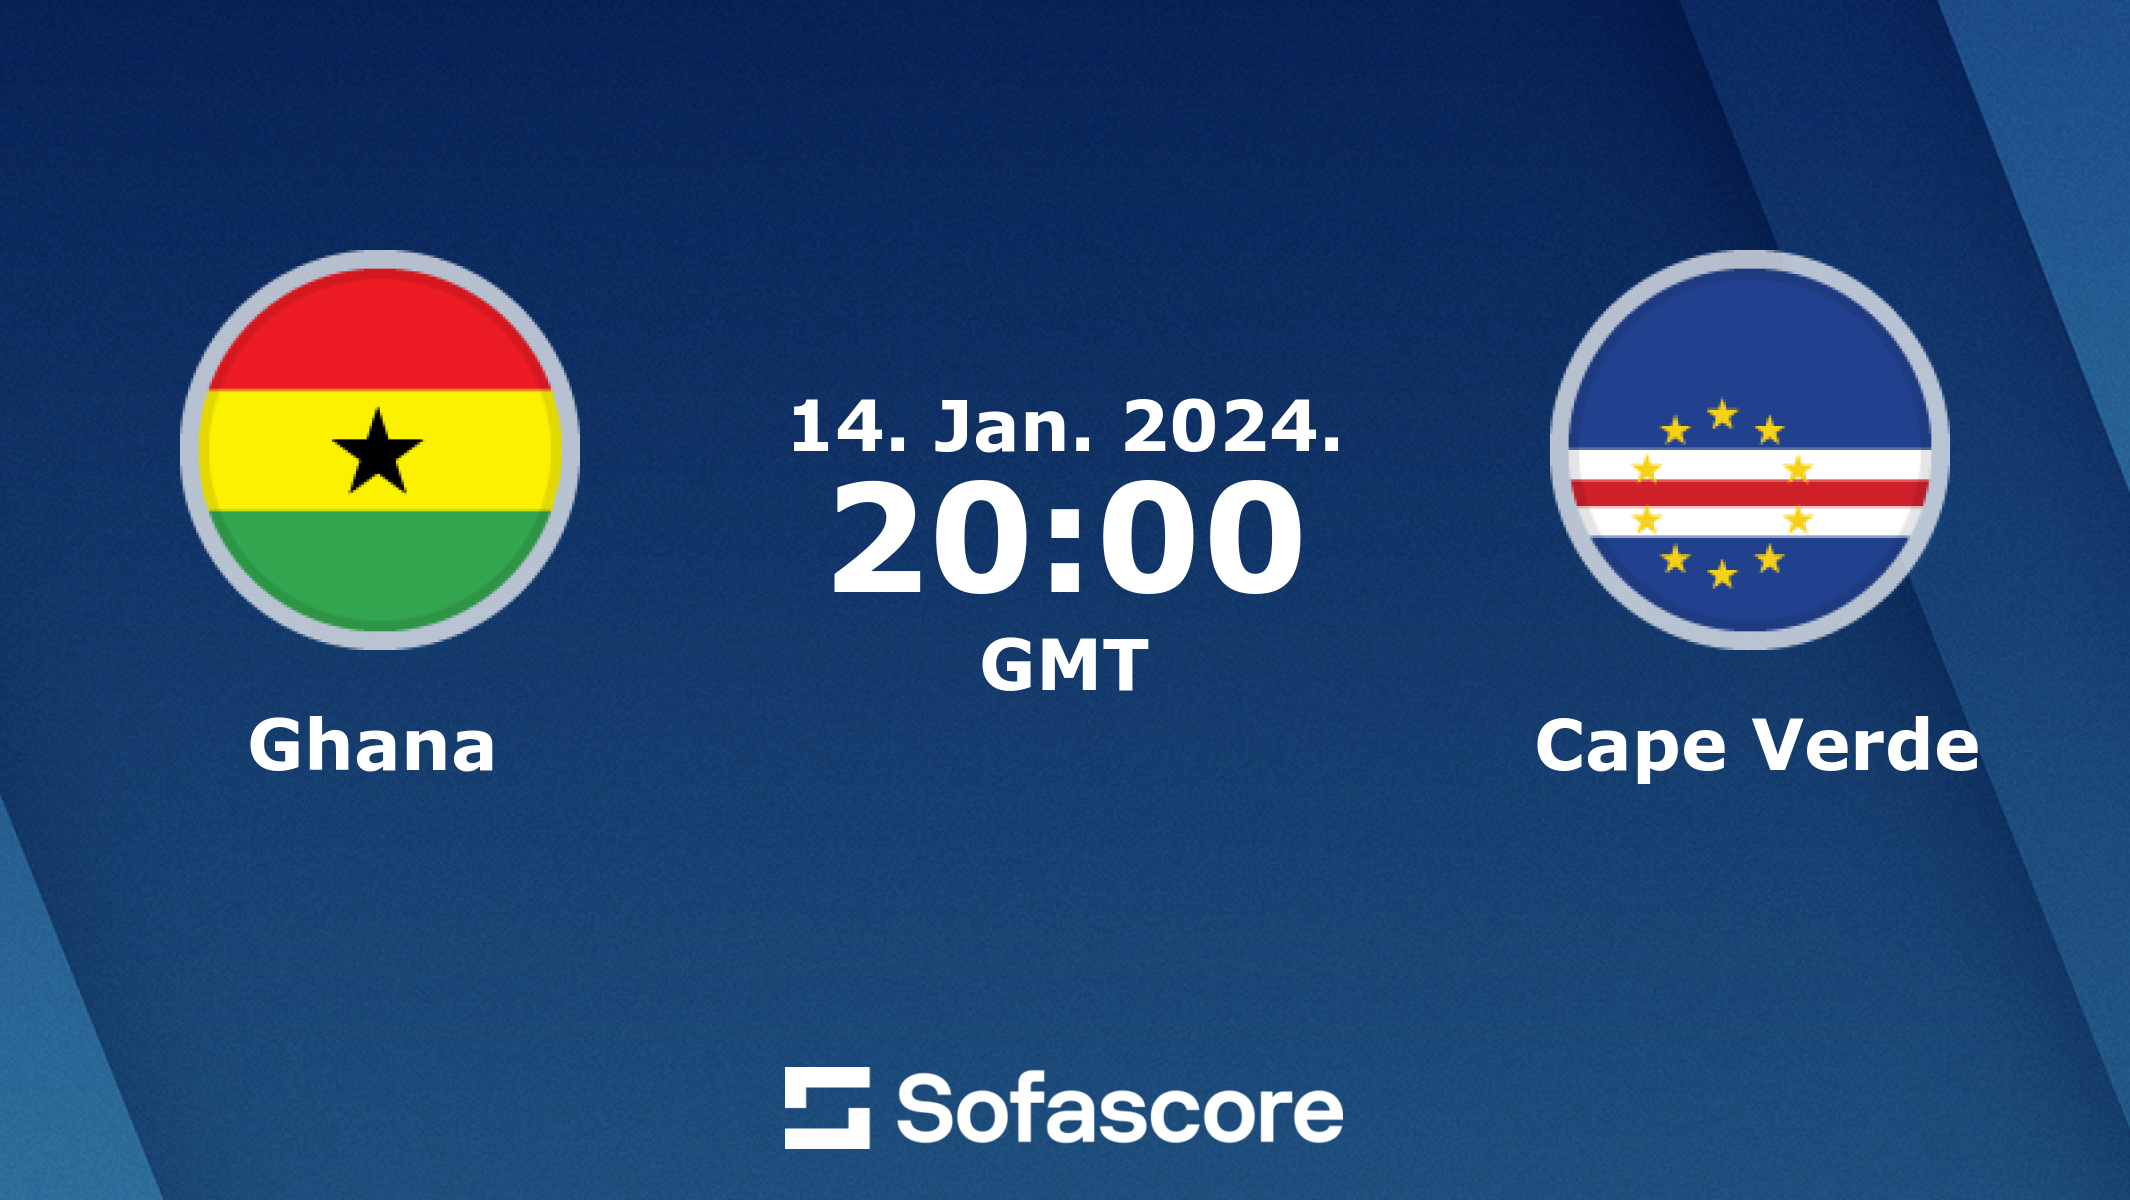 Live stream of the match between Ghana and Cape Vert in the CAF Nations 2023 in high quality